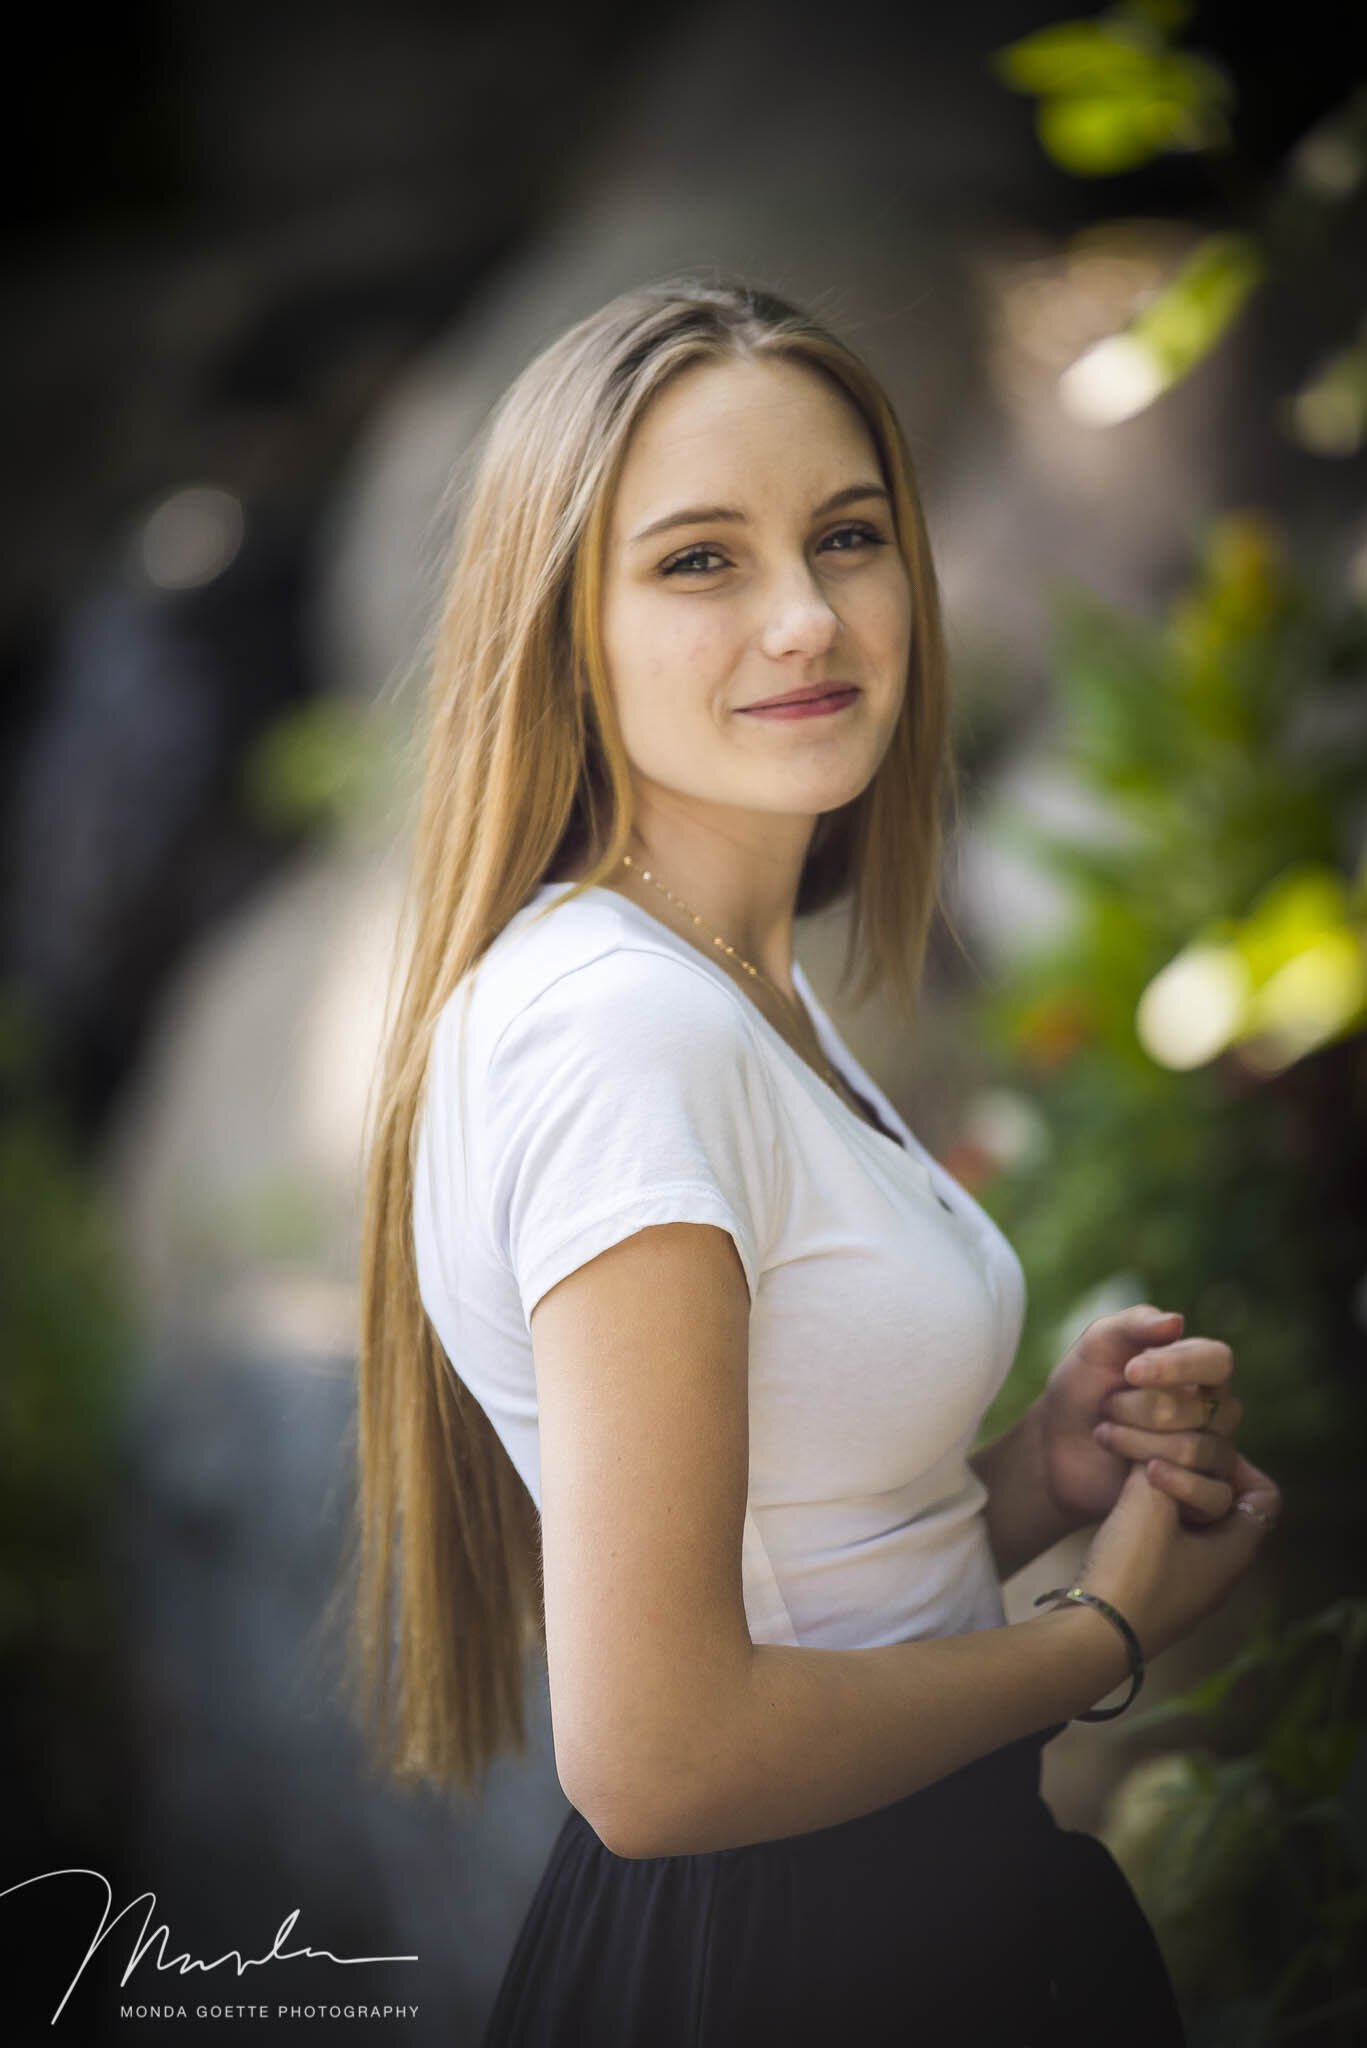 Outdoor portrait of a senior girl from Monda Goette Photography